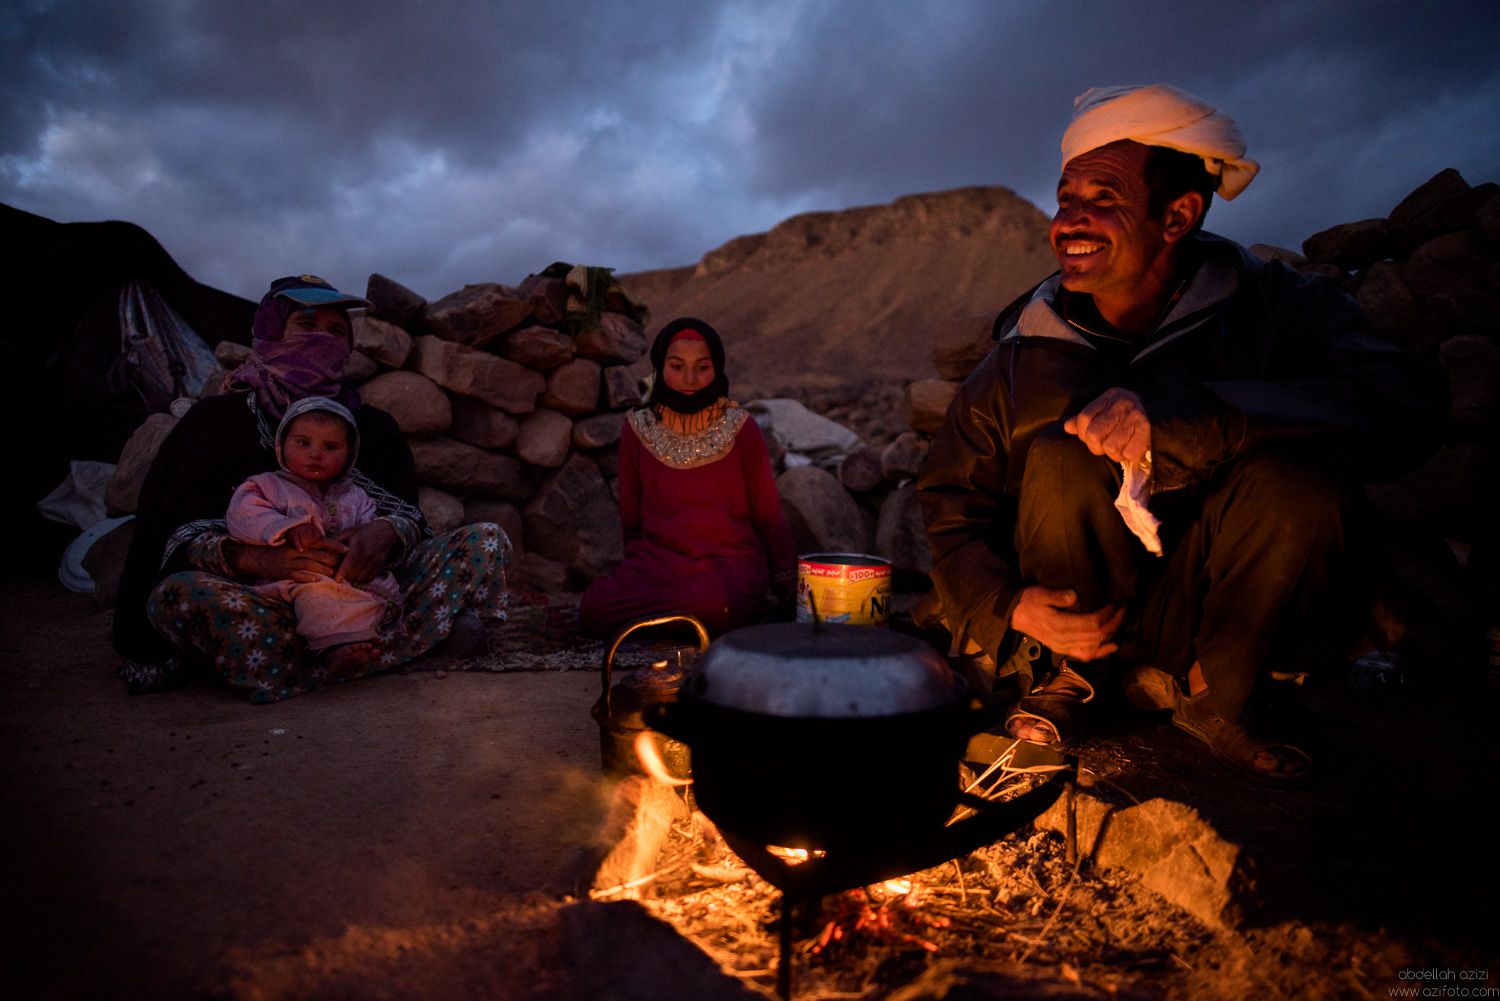 Dinner time - Ait Atta Nomads - Arhal project